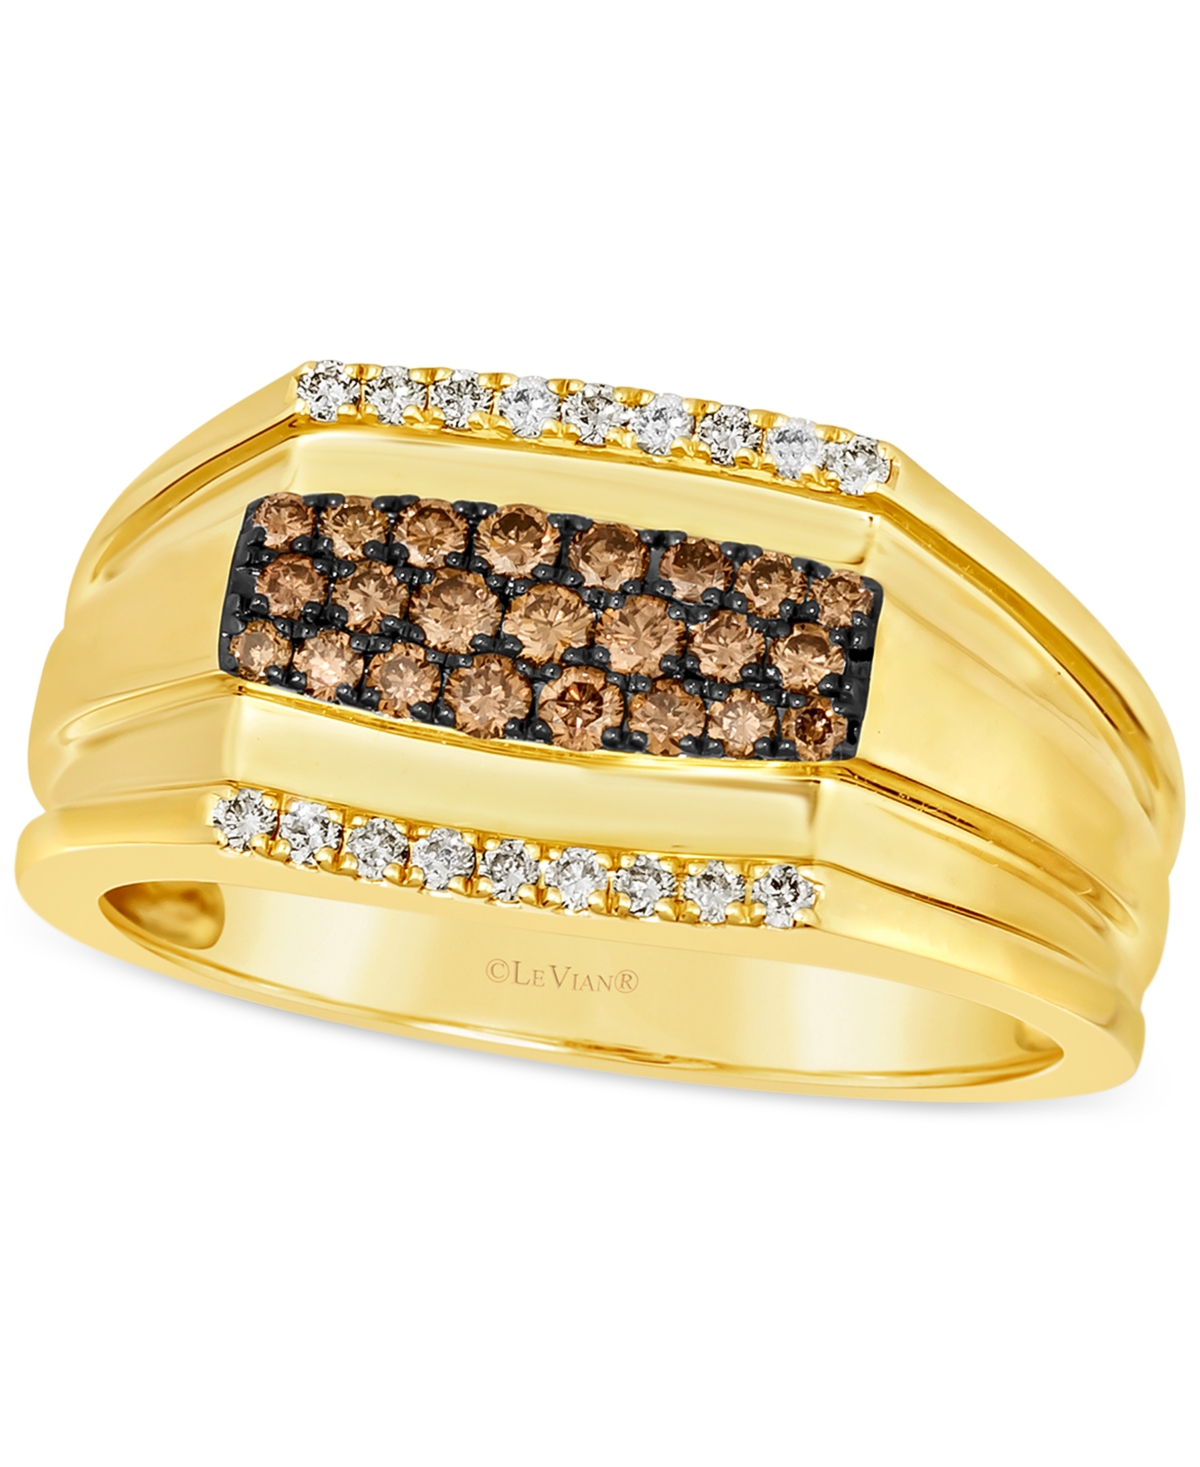 Le Vian Men's Chocolate Diamond (3/8 Ct. T.w.) & Nude Diamond (1/6 Ct. T.w.) Cluster Ring In 14k Gold In Yellow Gold